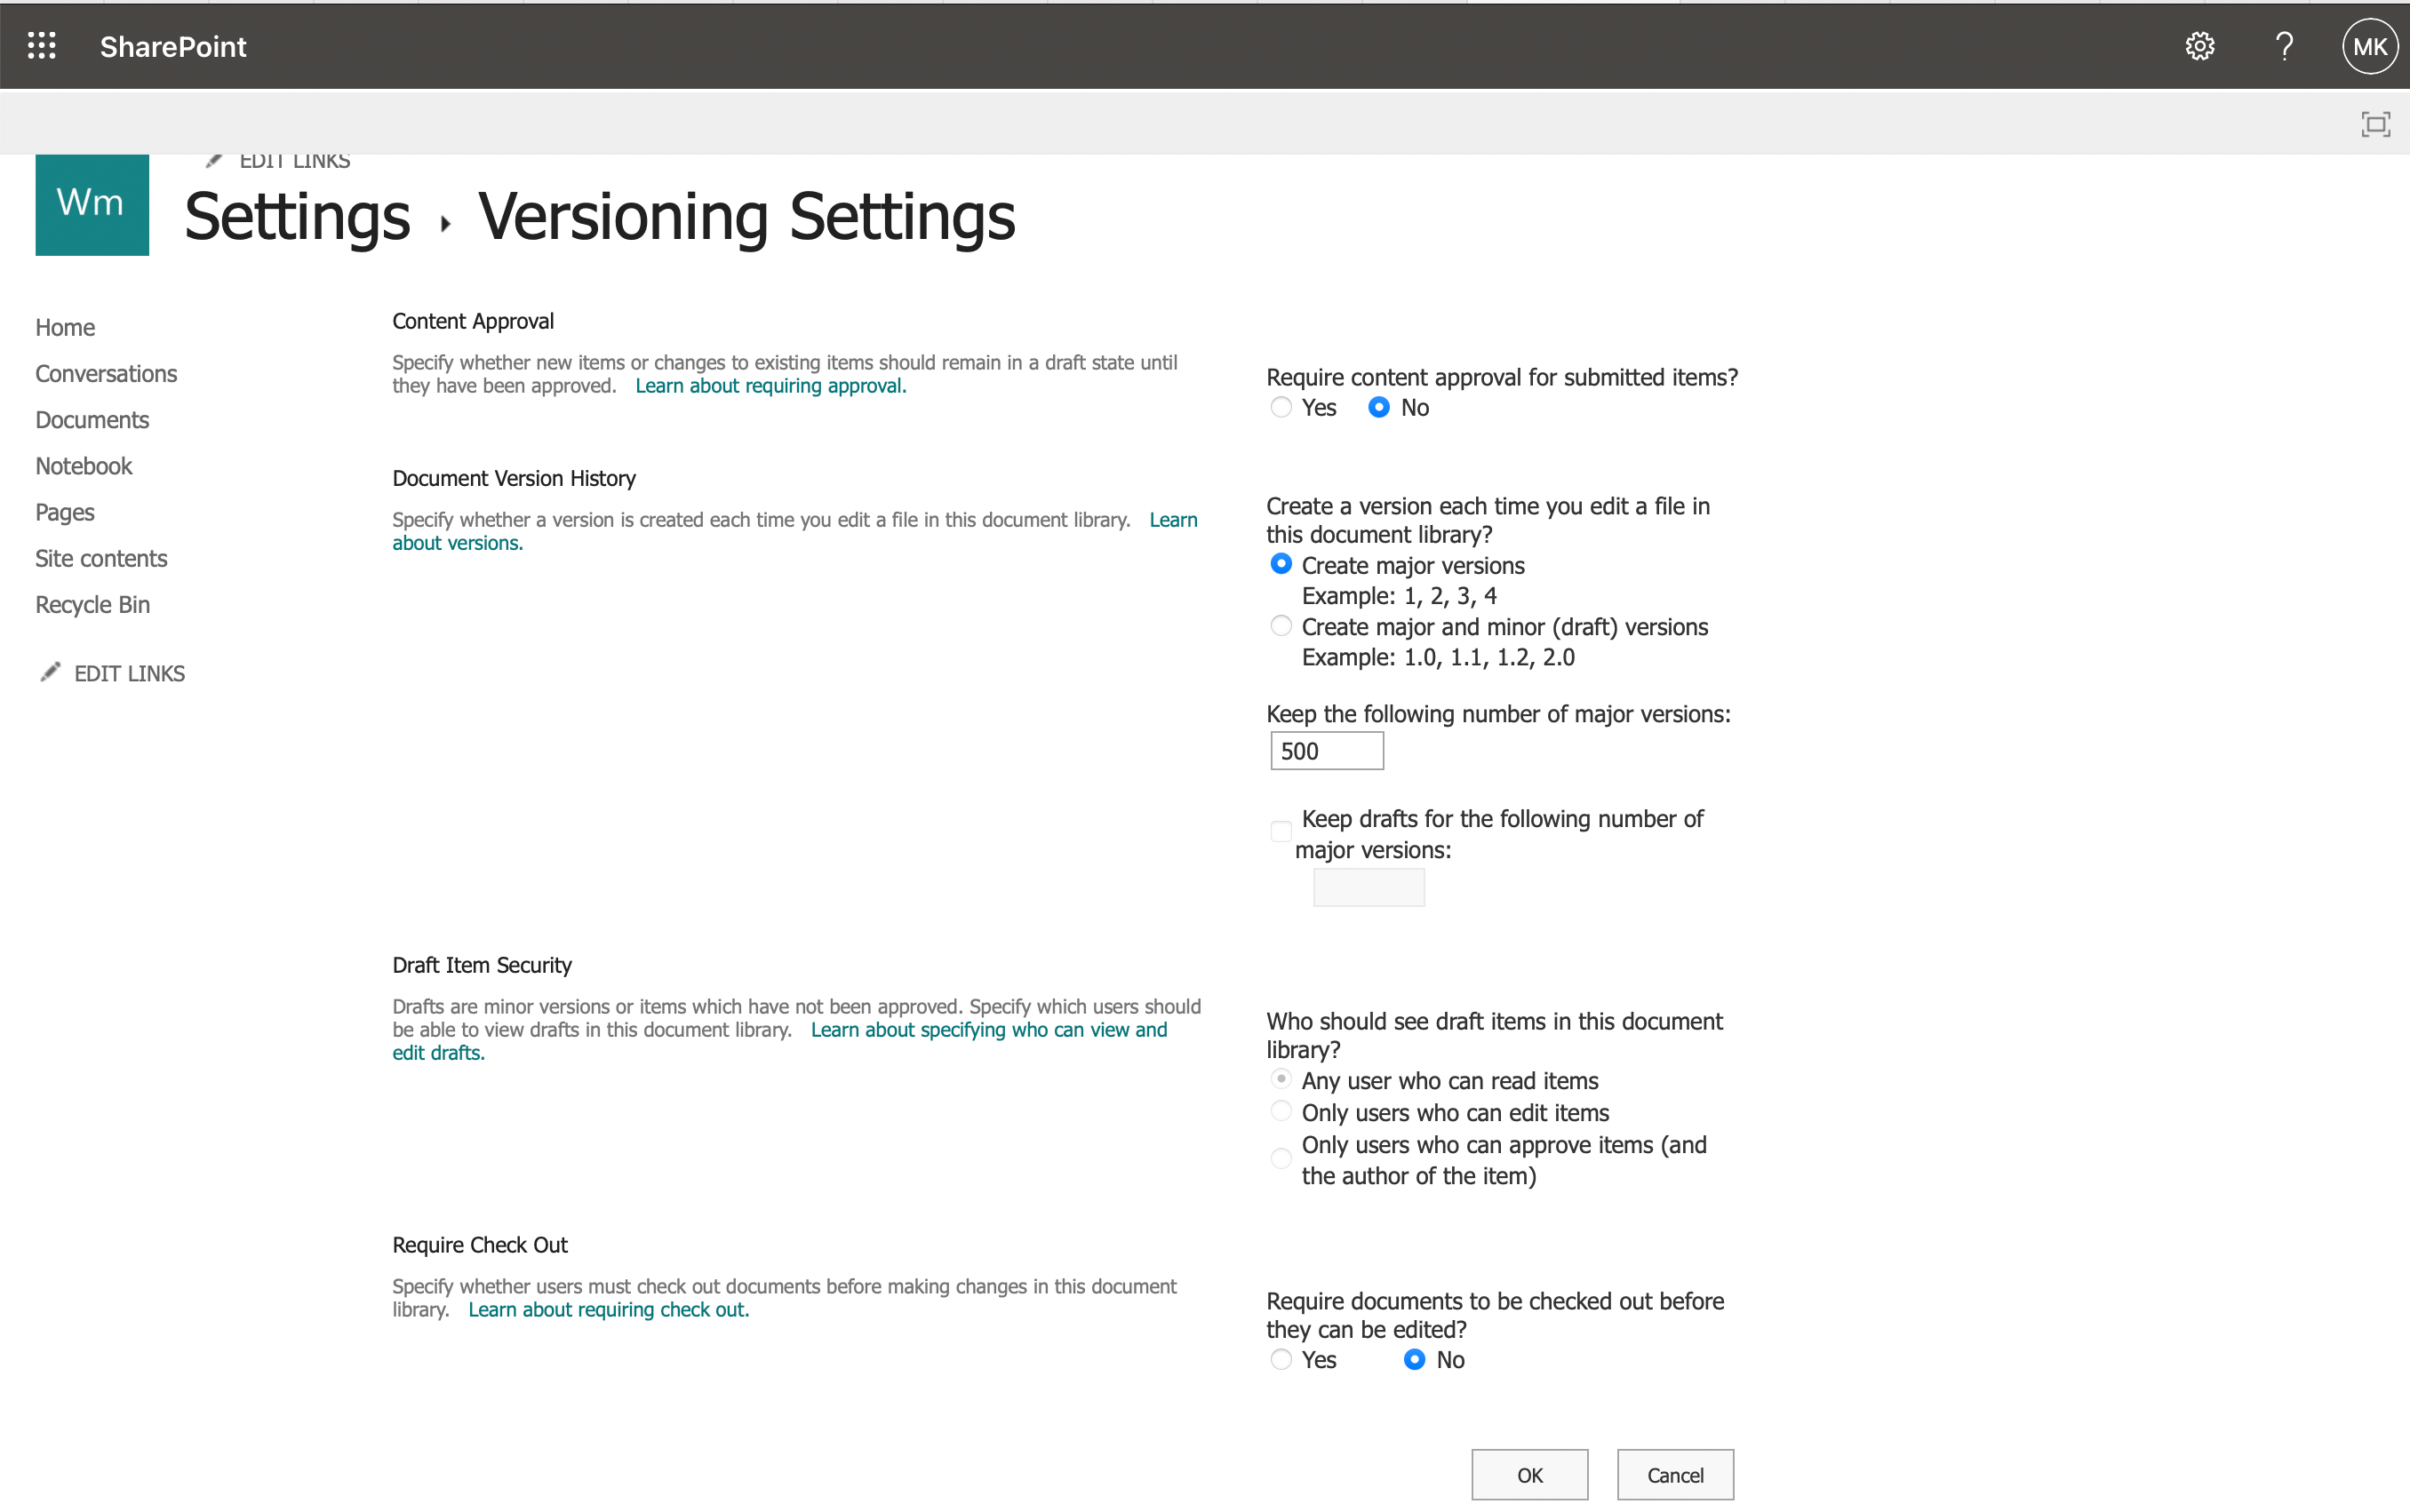 Accessing versioning settings in SharePoint